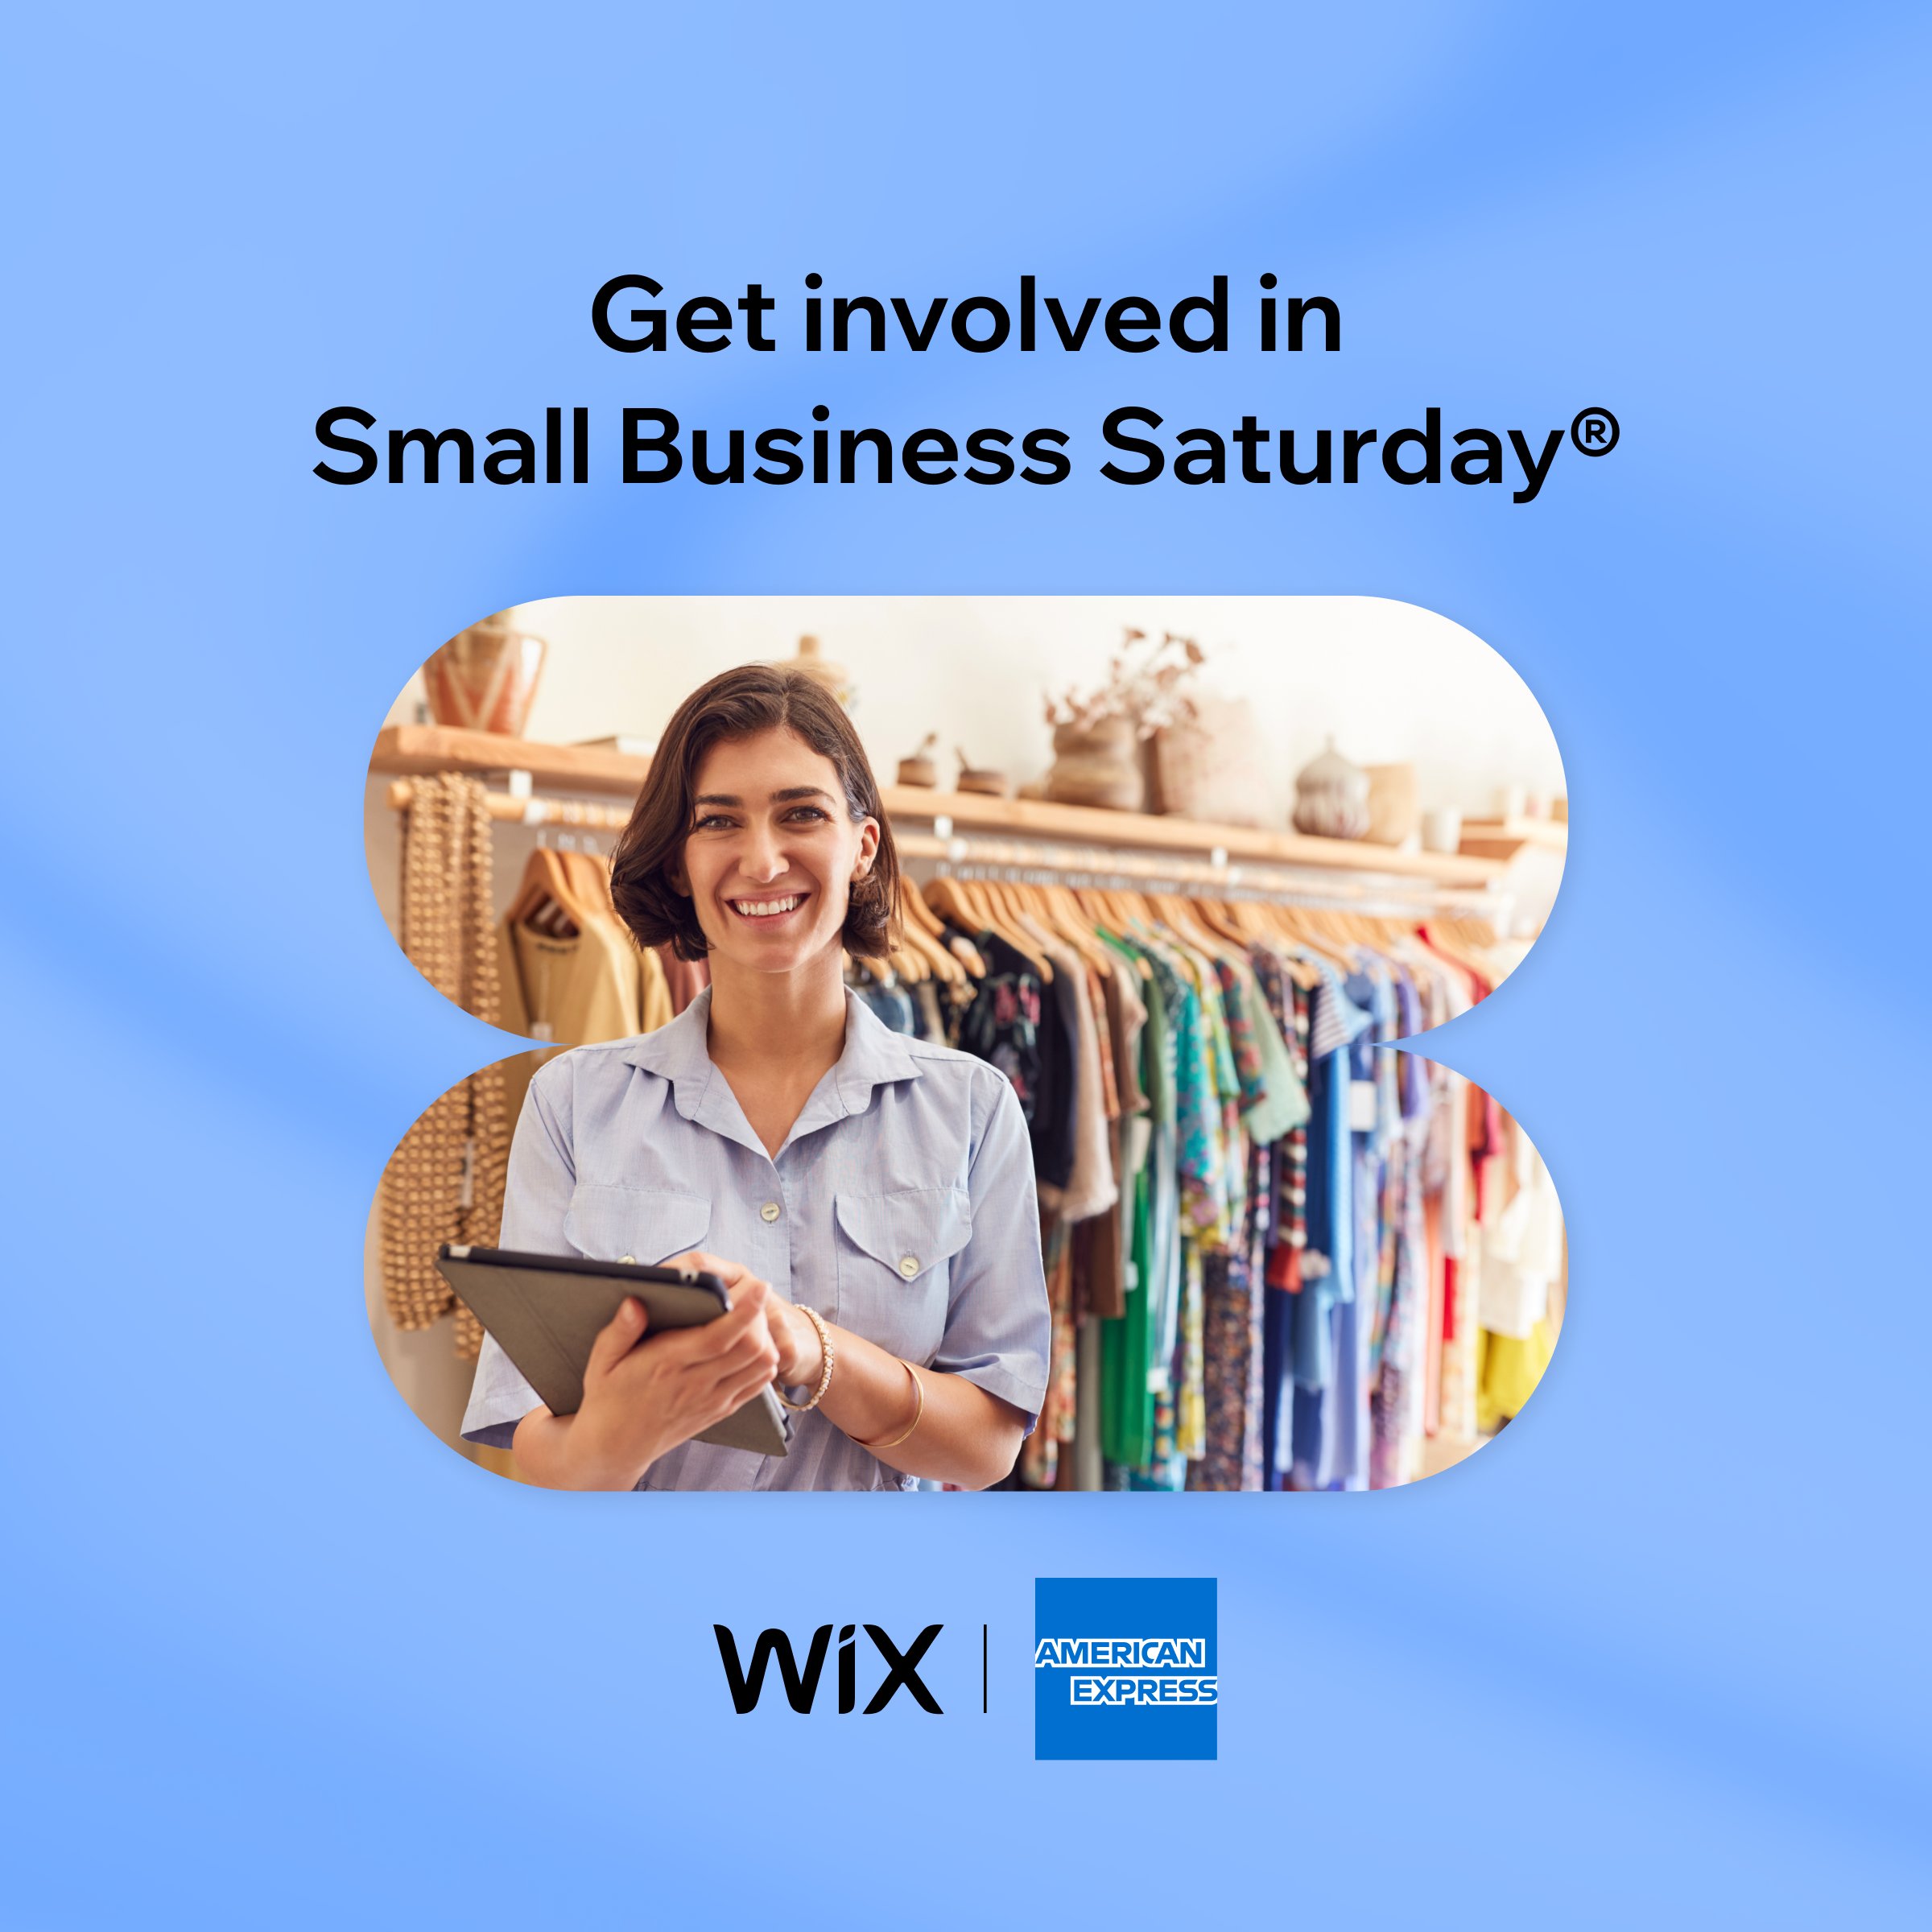 A Small Business owner smiling into the screen holding a notepad with clothes donning the background.

Text above the person's head says: "Get involved in Small Business Saturday"

Below the person are the Wix and American Express logos, side-by-side.